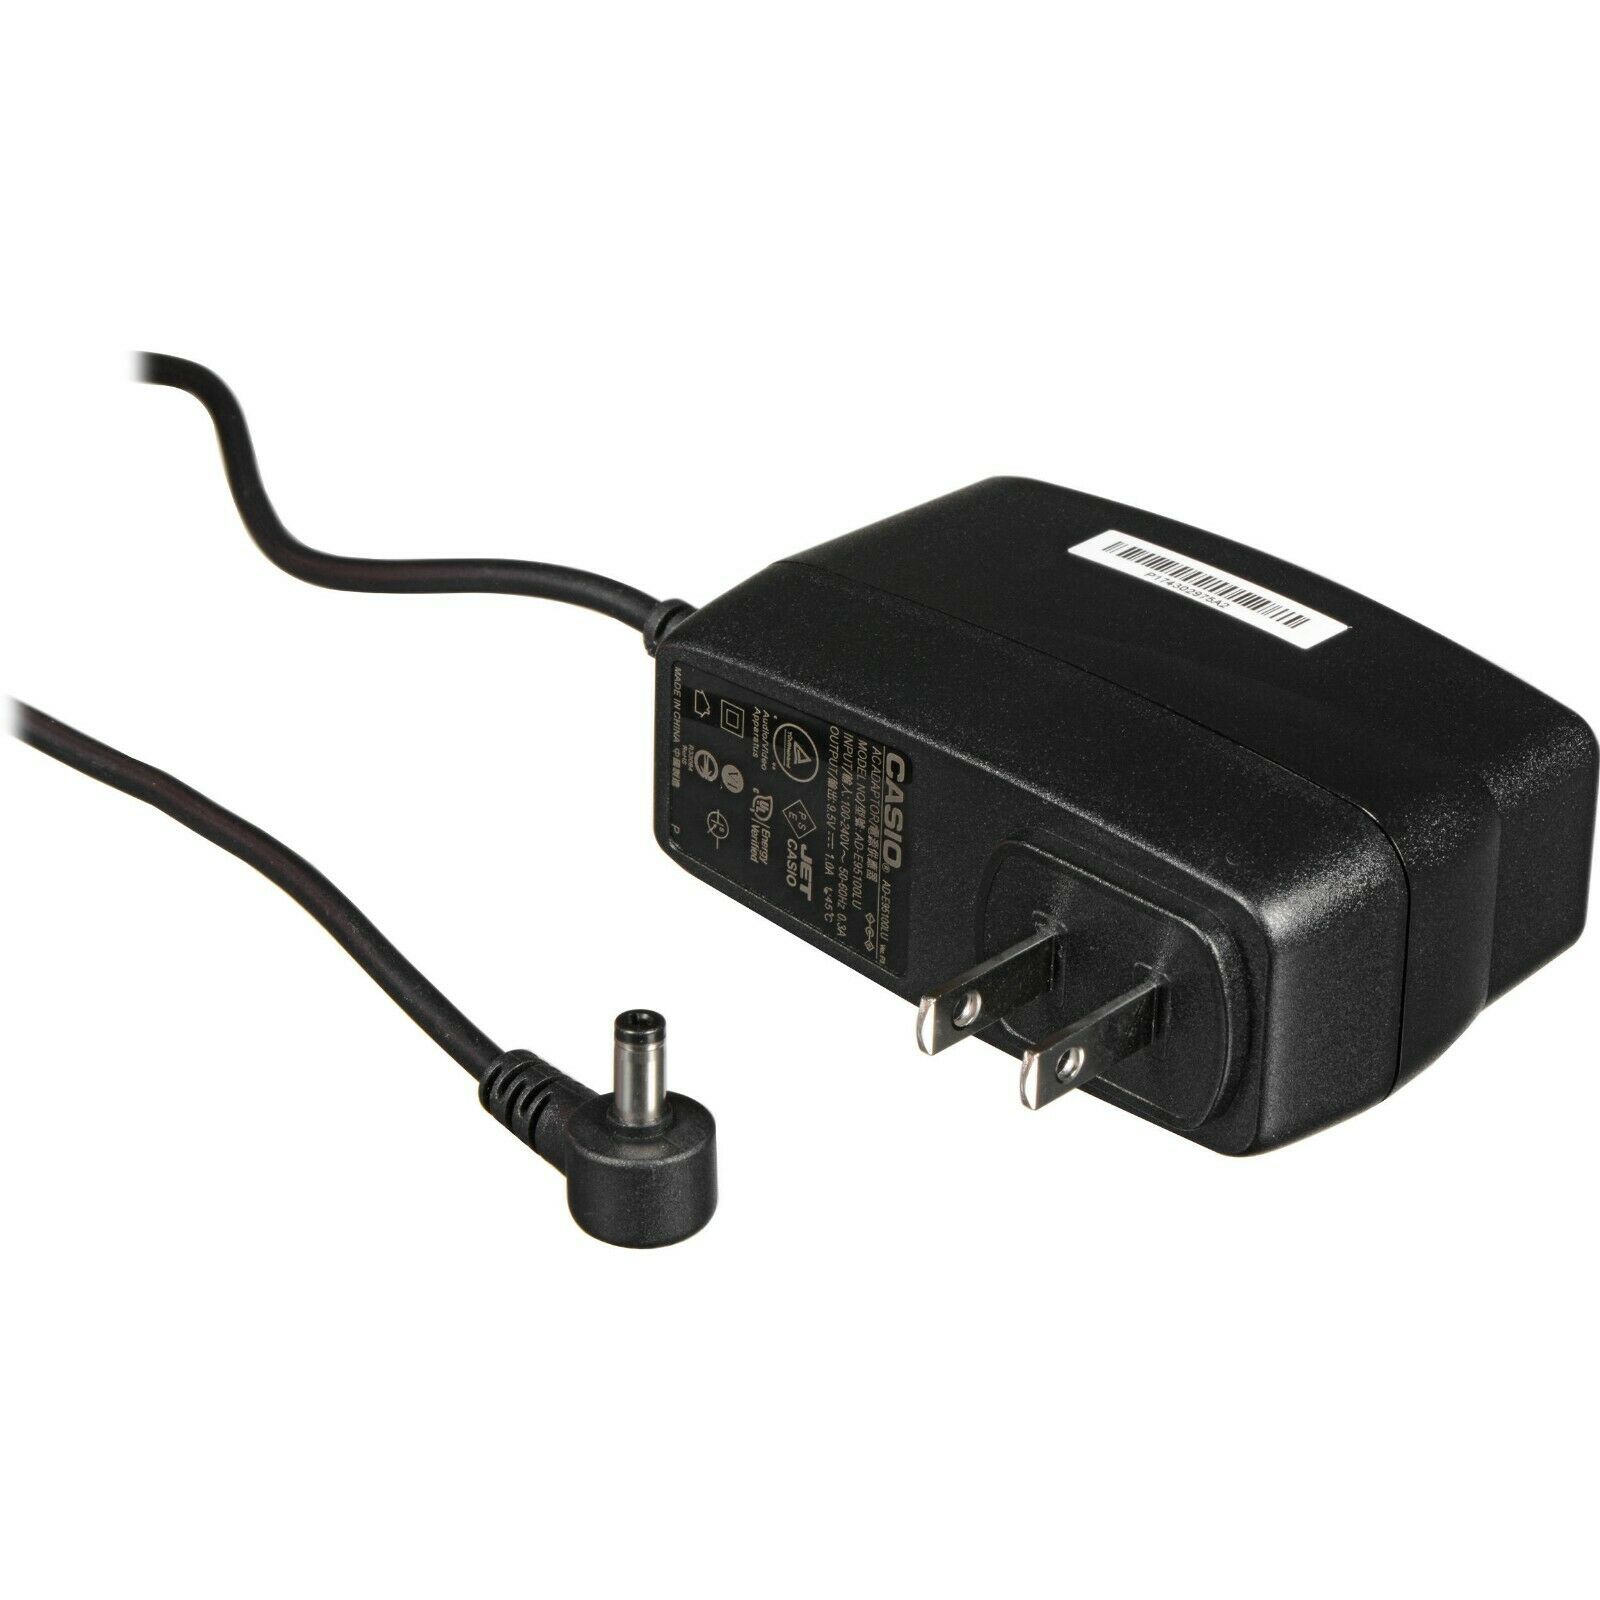 The AD-E95100 from Casio is an AC power adapter that is compatible with several musical-instrument keyboards. It can be